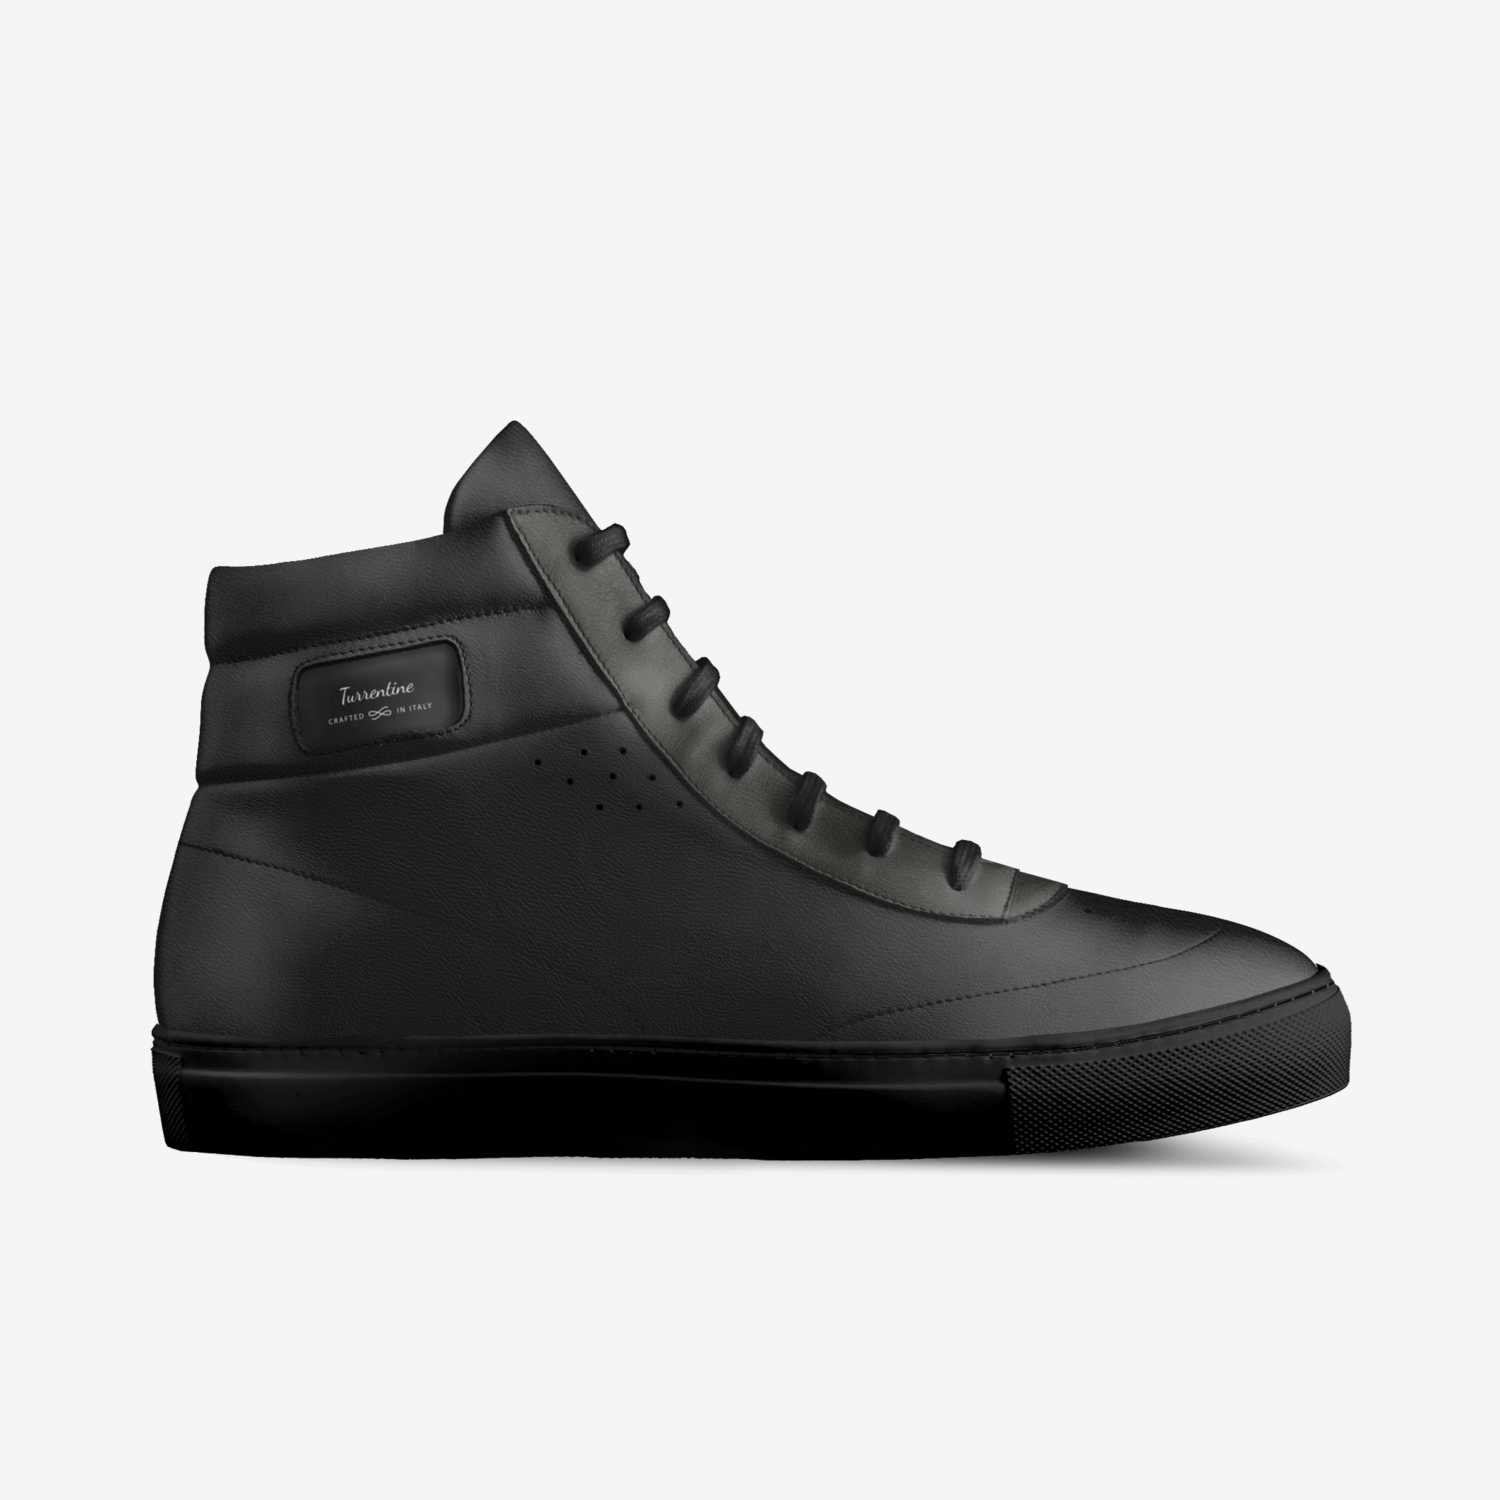 Turrentine | A Custom Shoe concept by Christopher Turrentine